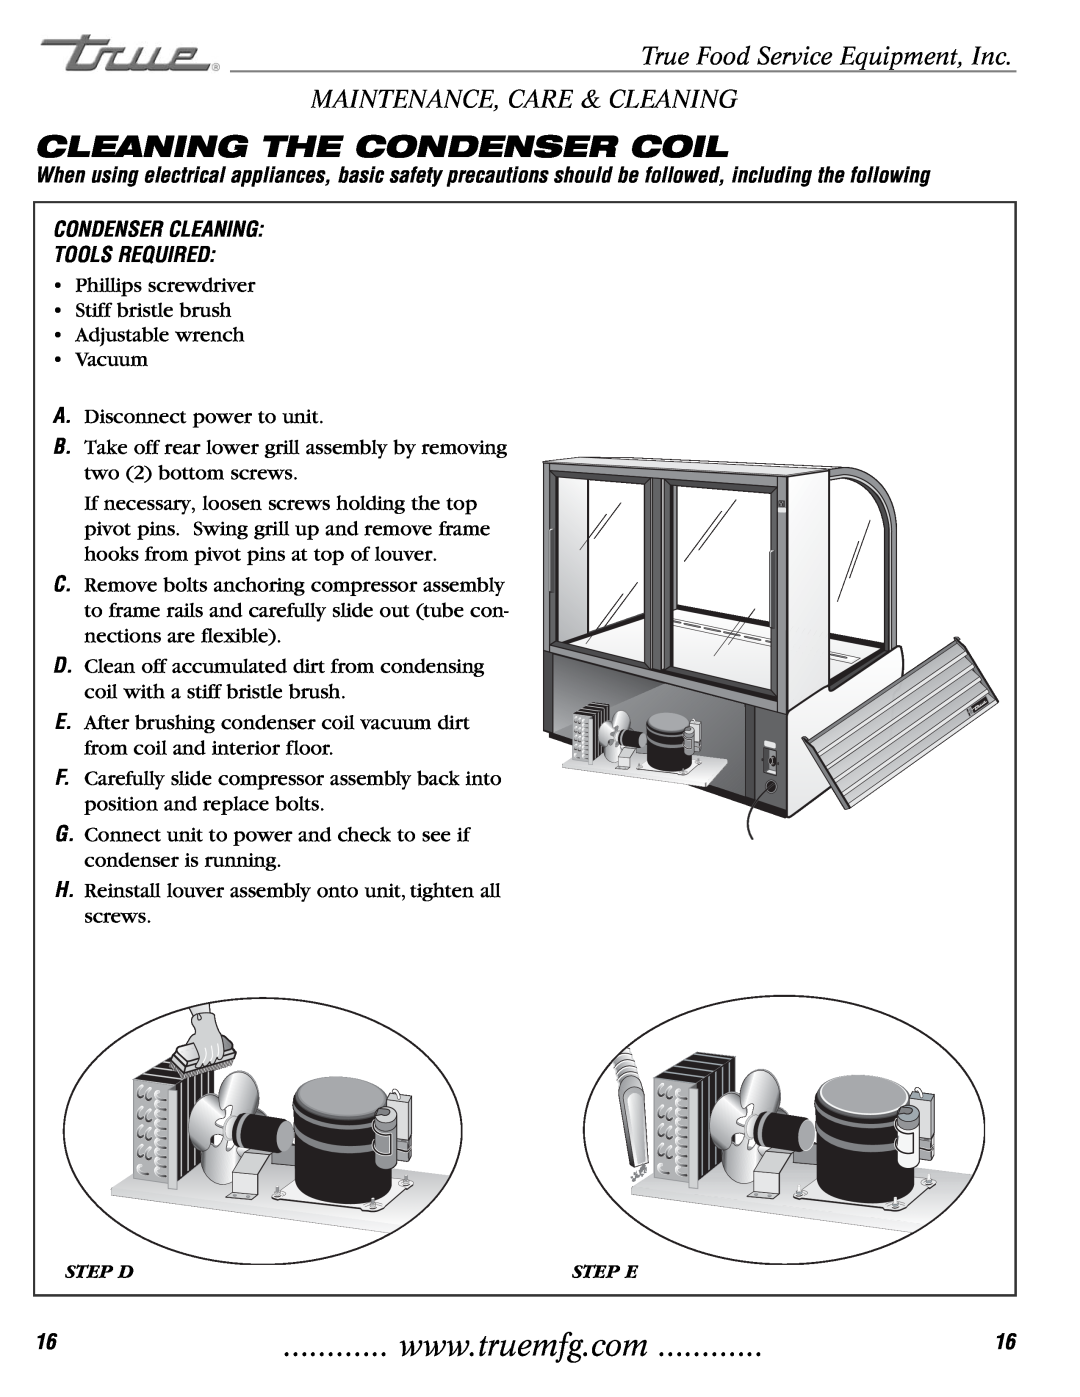 True Manufacturing Company TCGR-77 installation manual Cleaning The Condenser Coil, True Food Service Equipment, Inc 